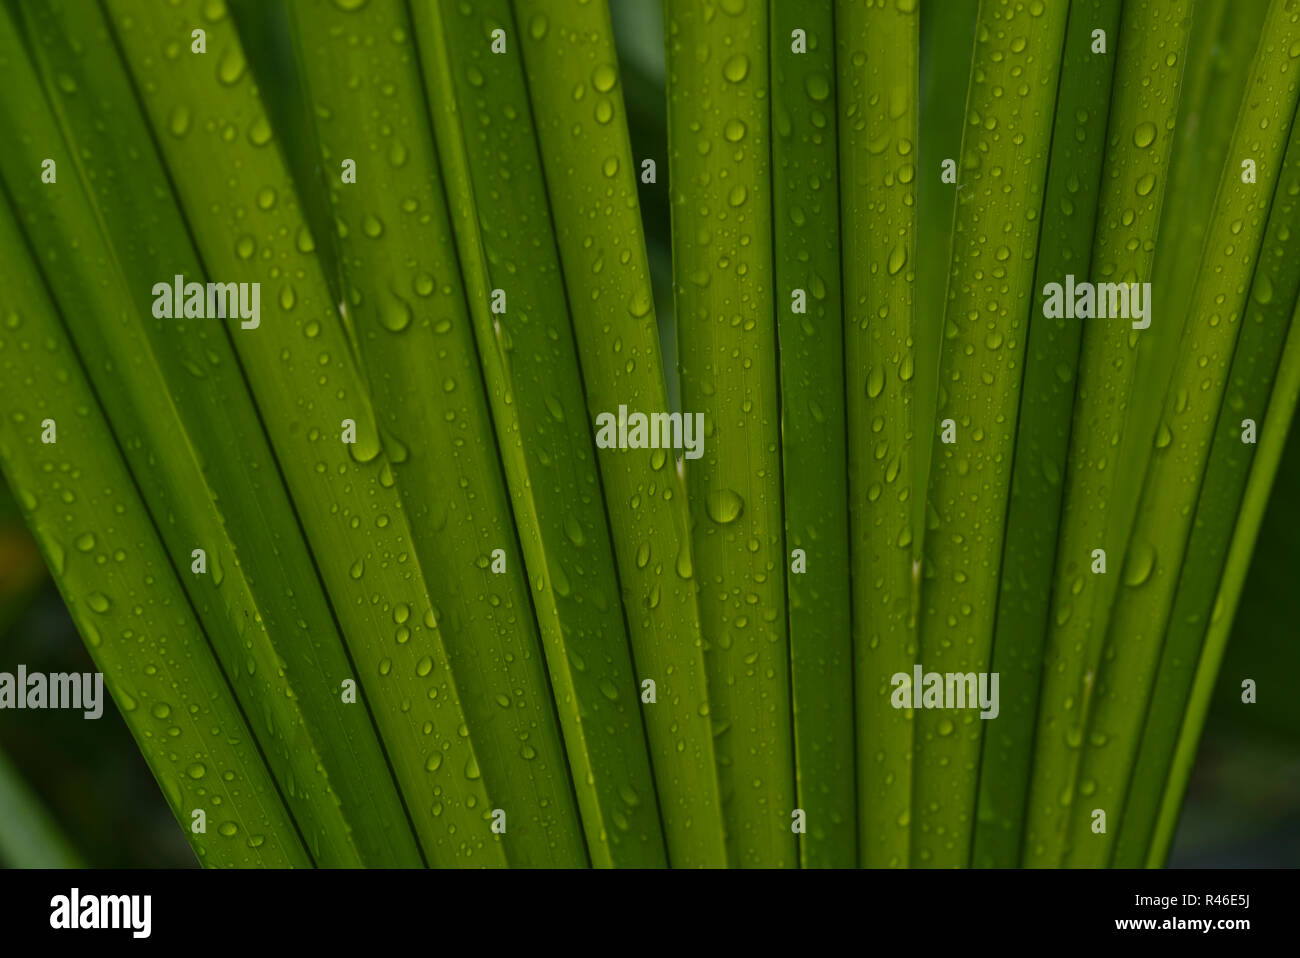 Palm leafs close up green background with rain drops Stock Photo